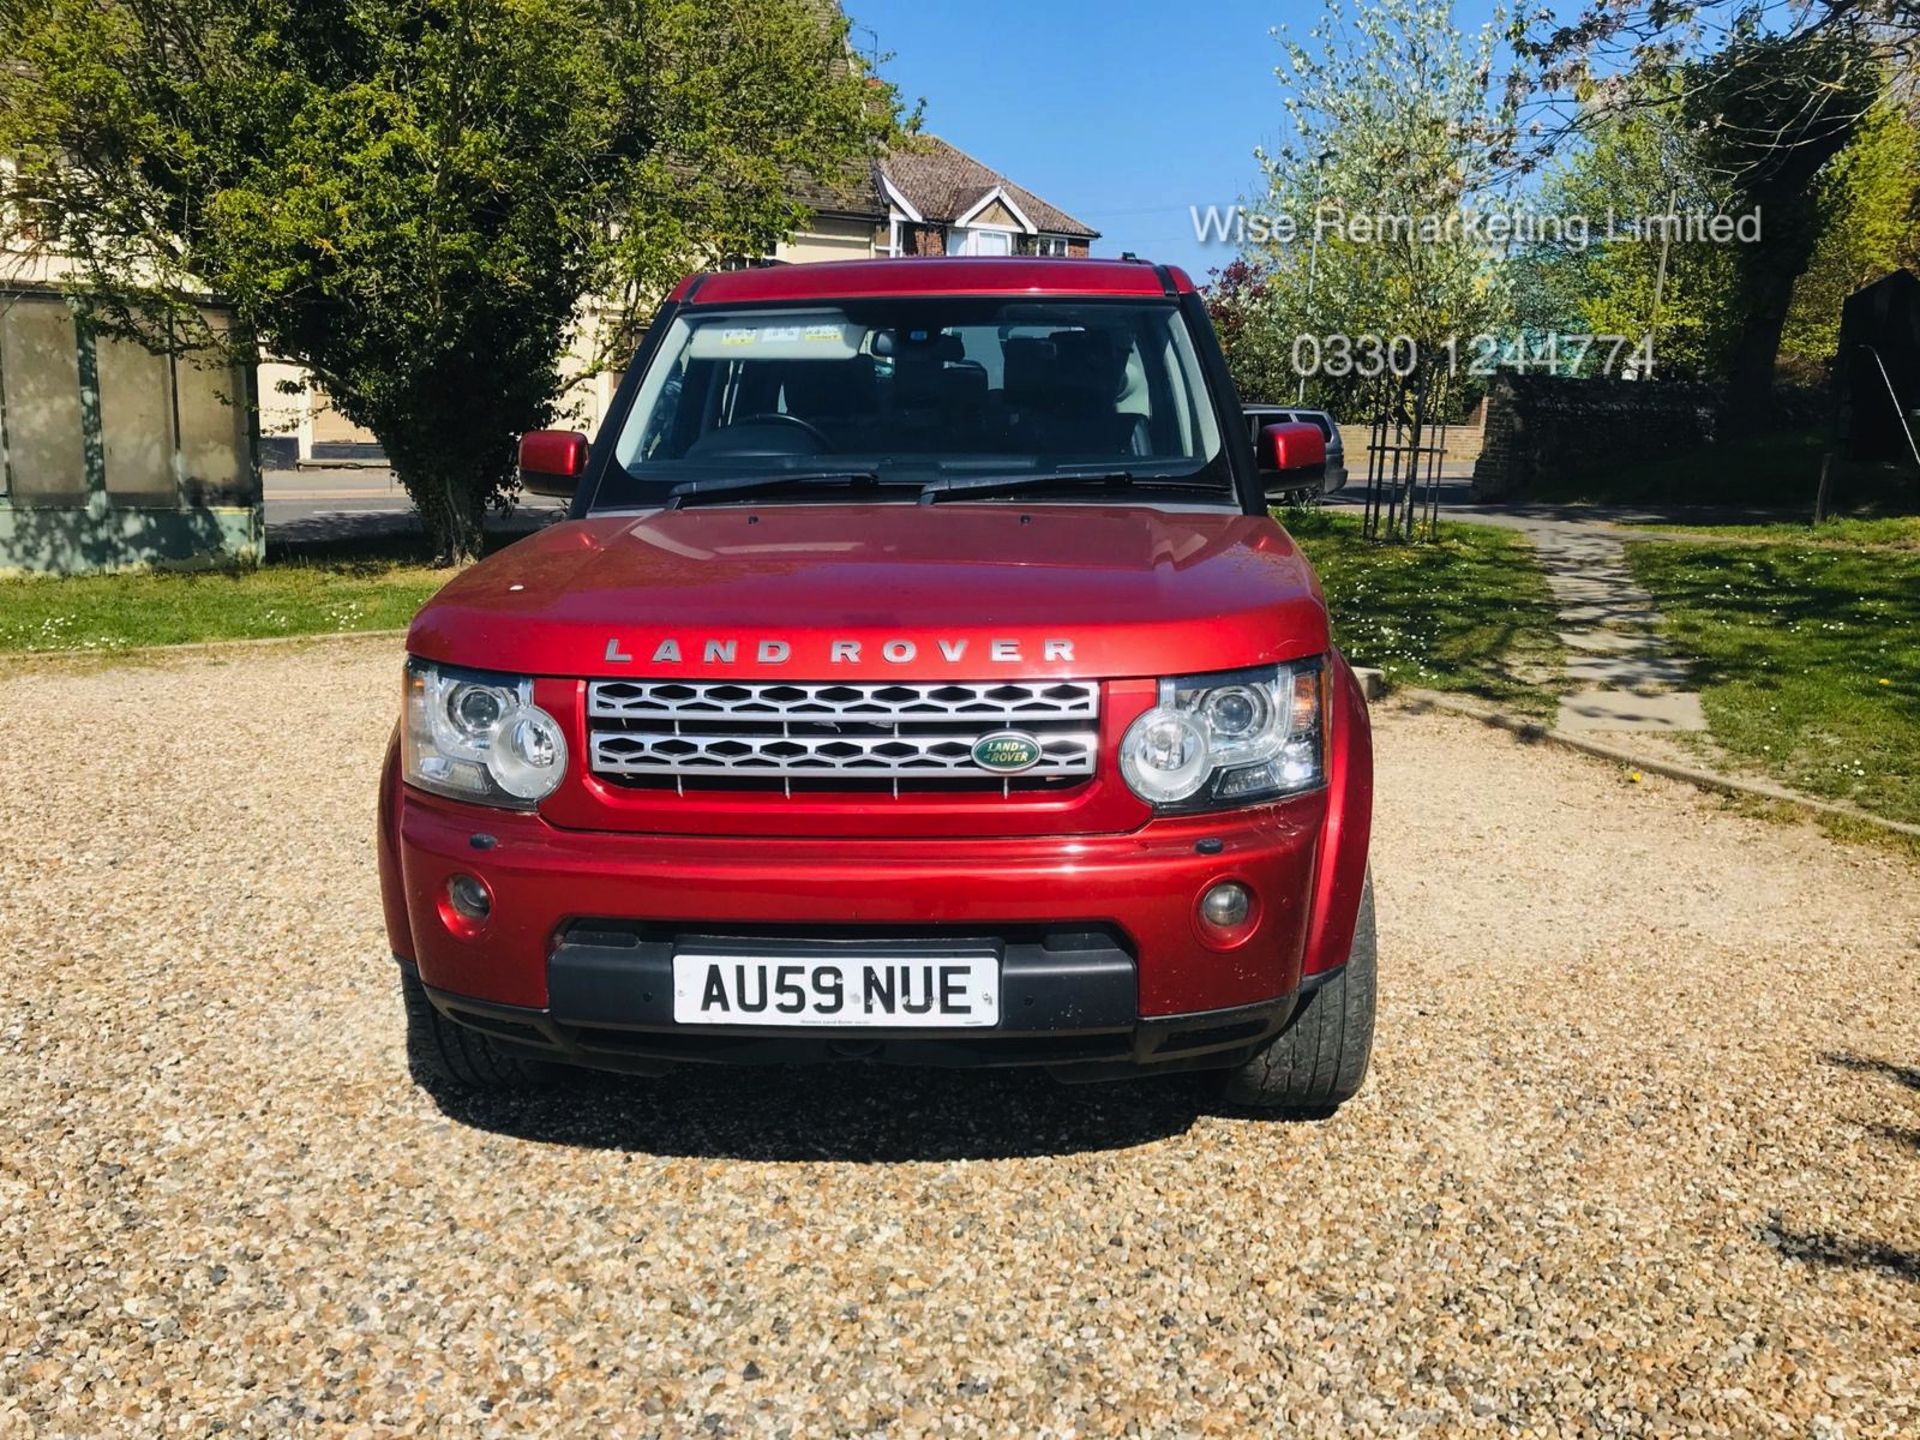 (RESERVE MET) Land Rover Discovery HSE 3.0 TDV6 Auto - 2010 Reg - Sat Nav - Sun Roofs - 7 Seats - - Image 2 of 30